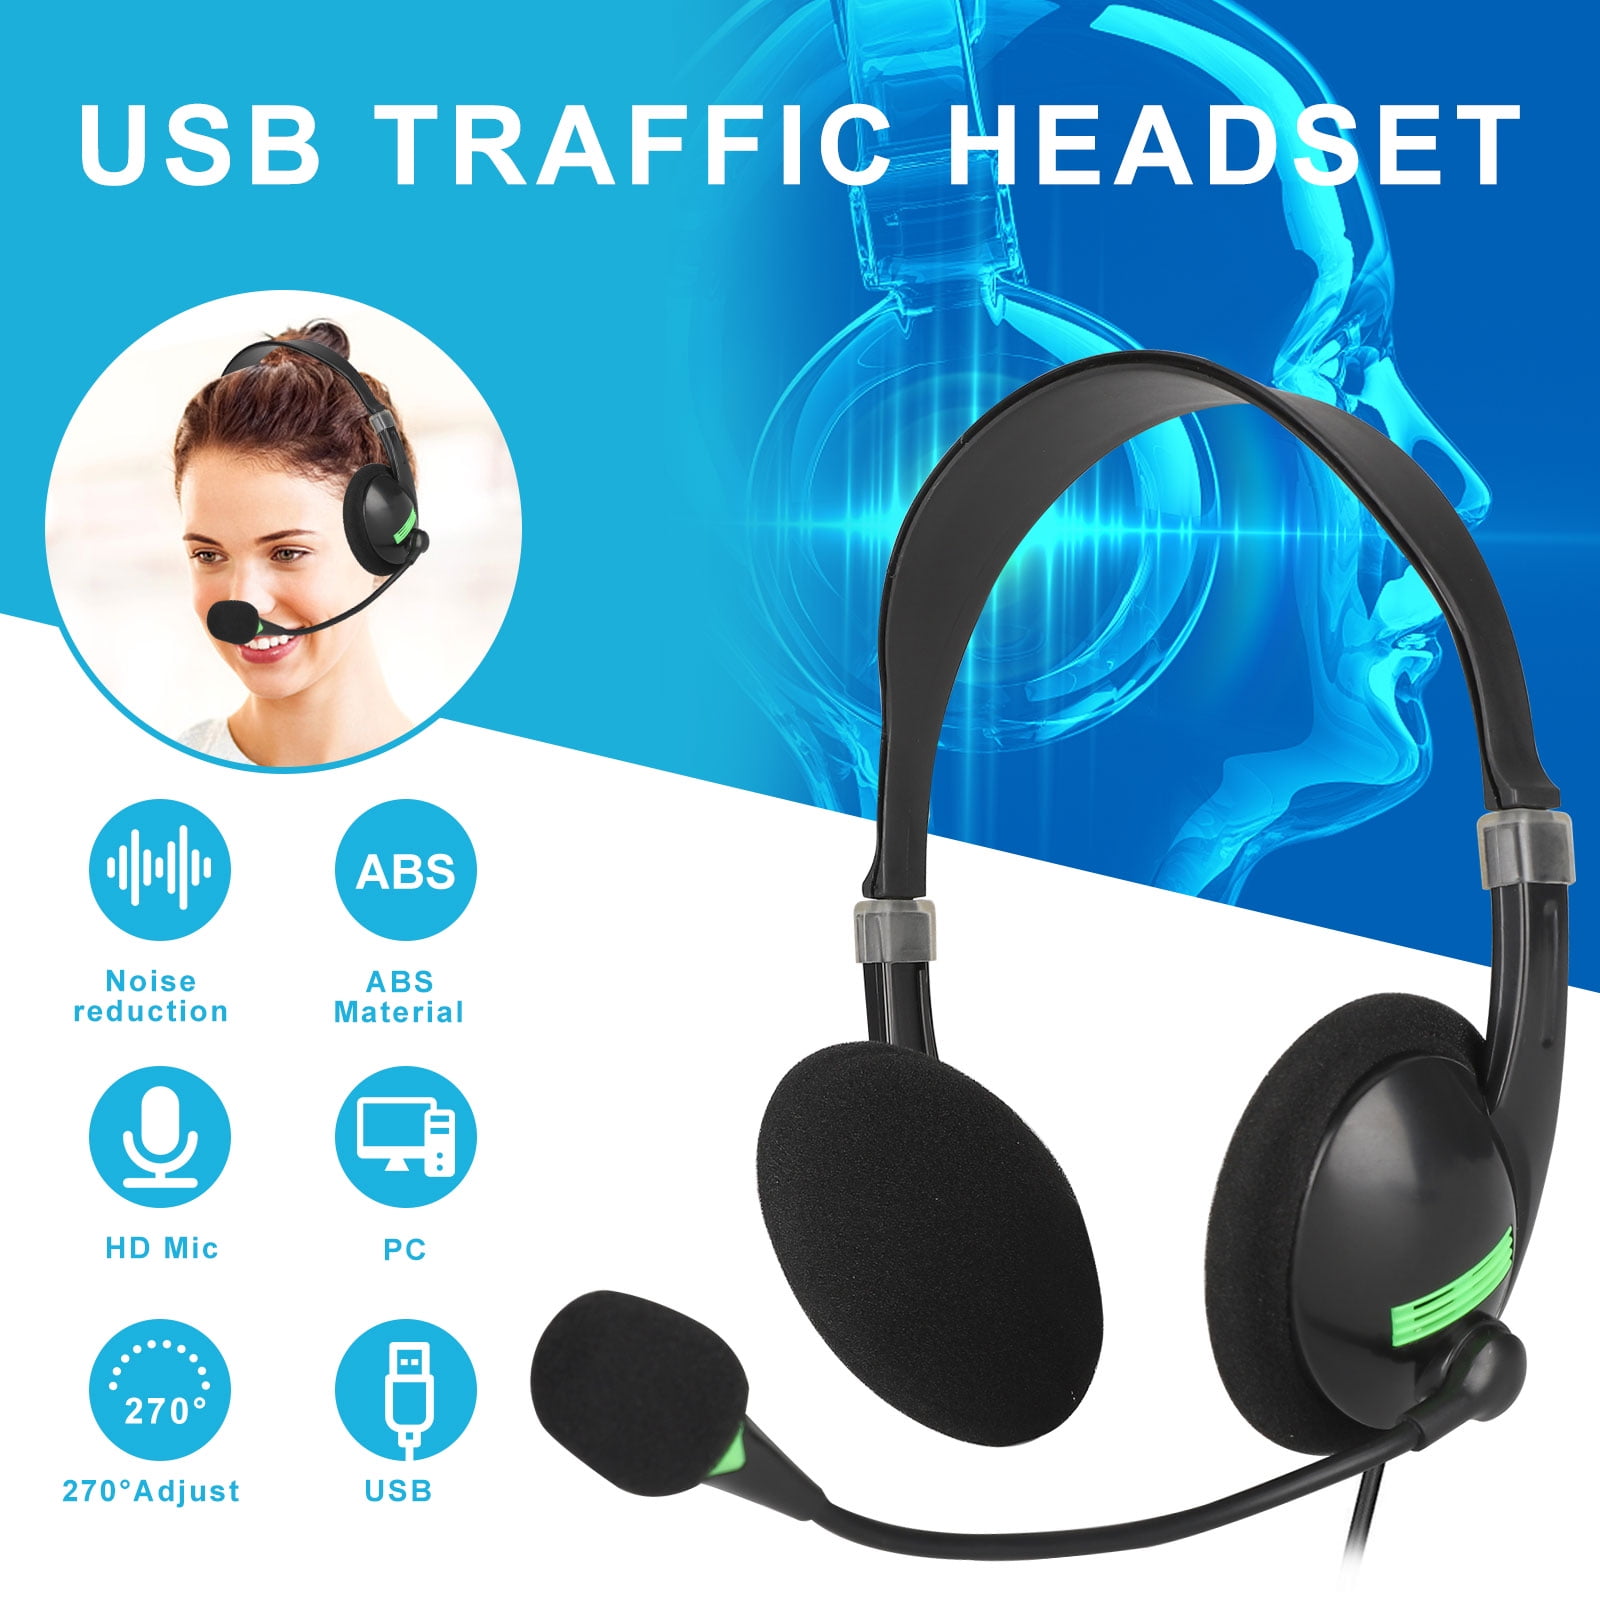 USB Telephone Headset, EEEkit USB Headset with Microphone Computer PC Headset Dual Ear for Skype Chat, Online Learing, Conference Calls, Voice Chat, Softphones Call, Gaming etc